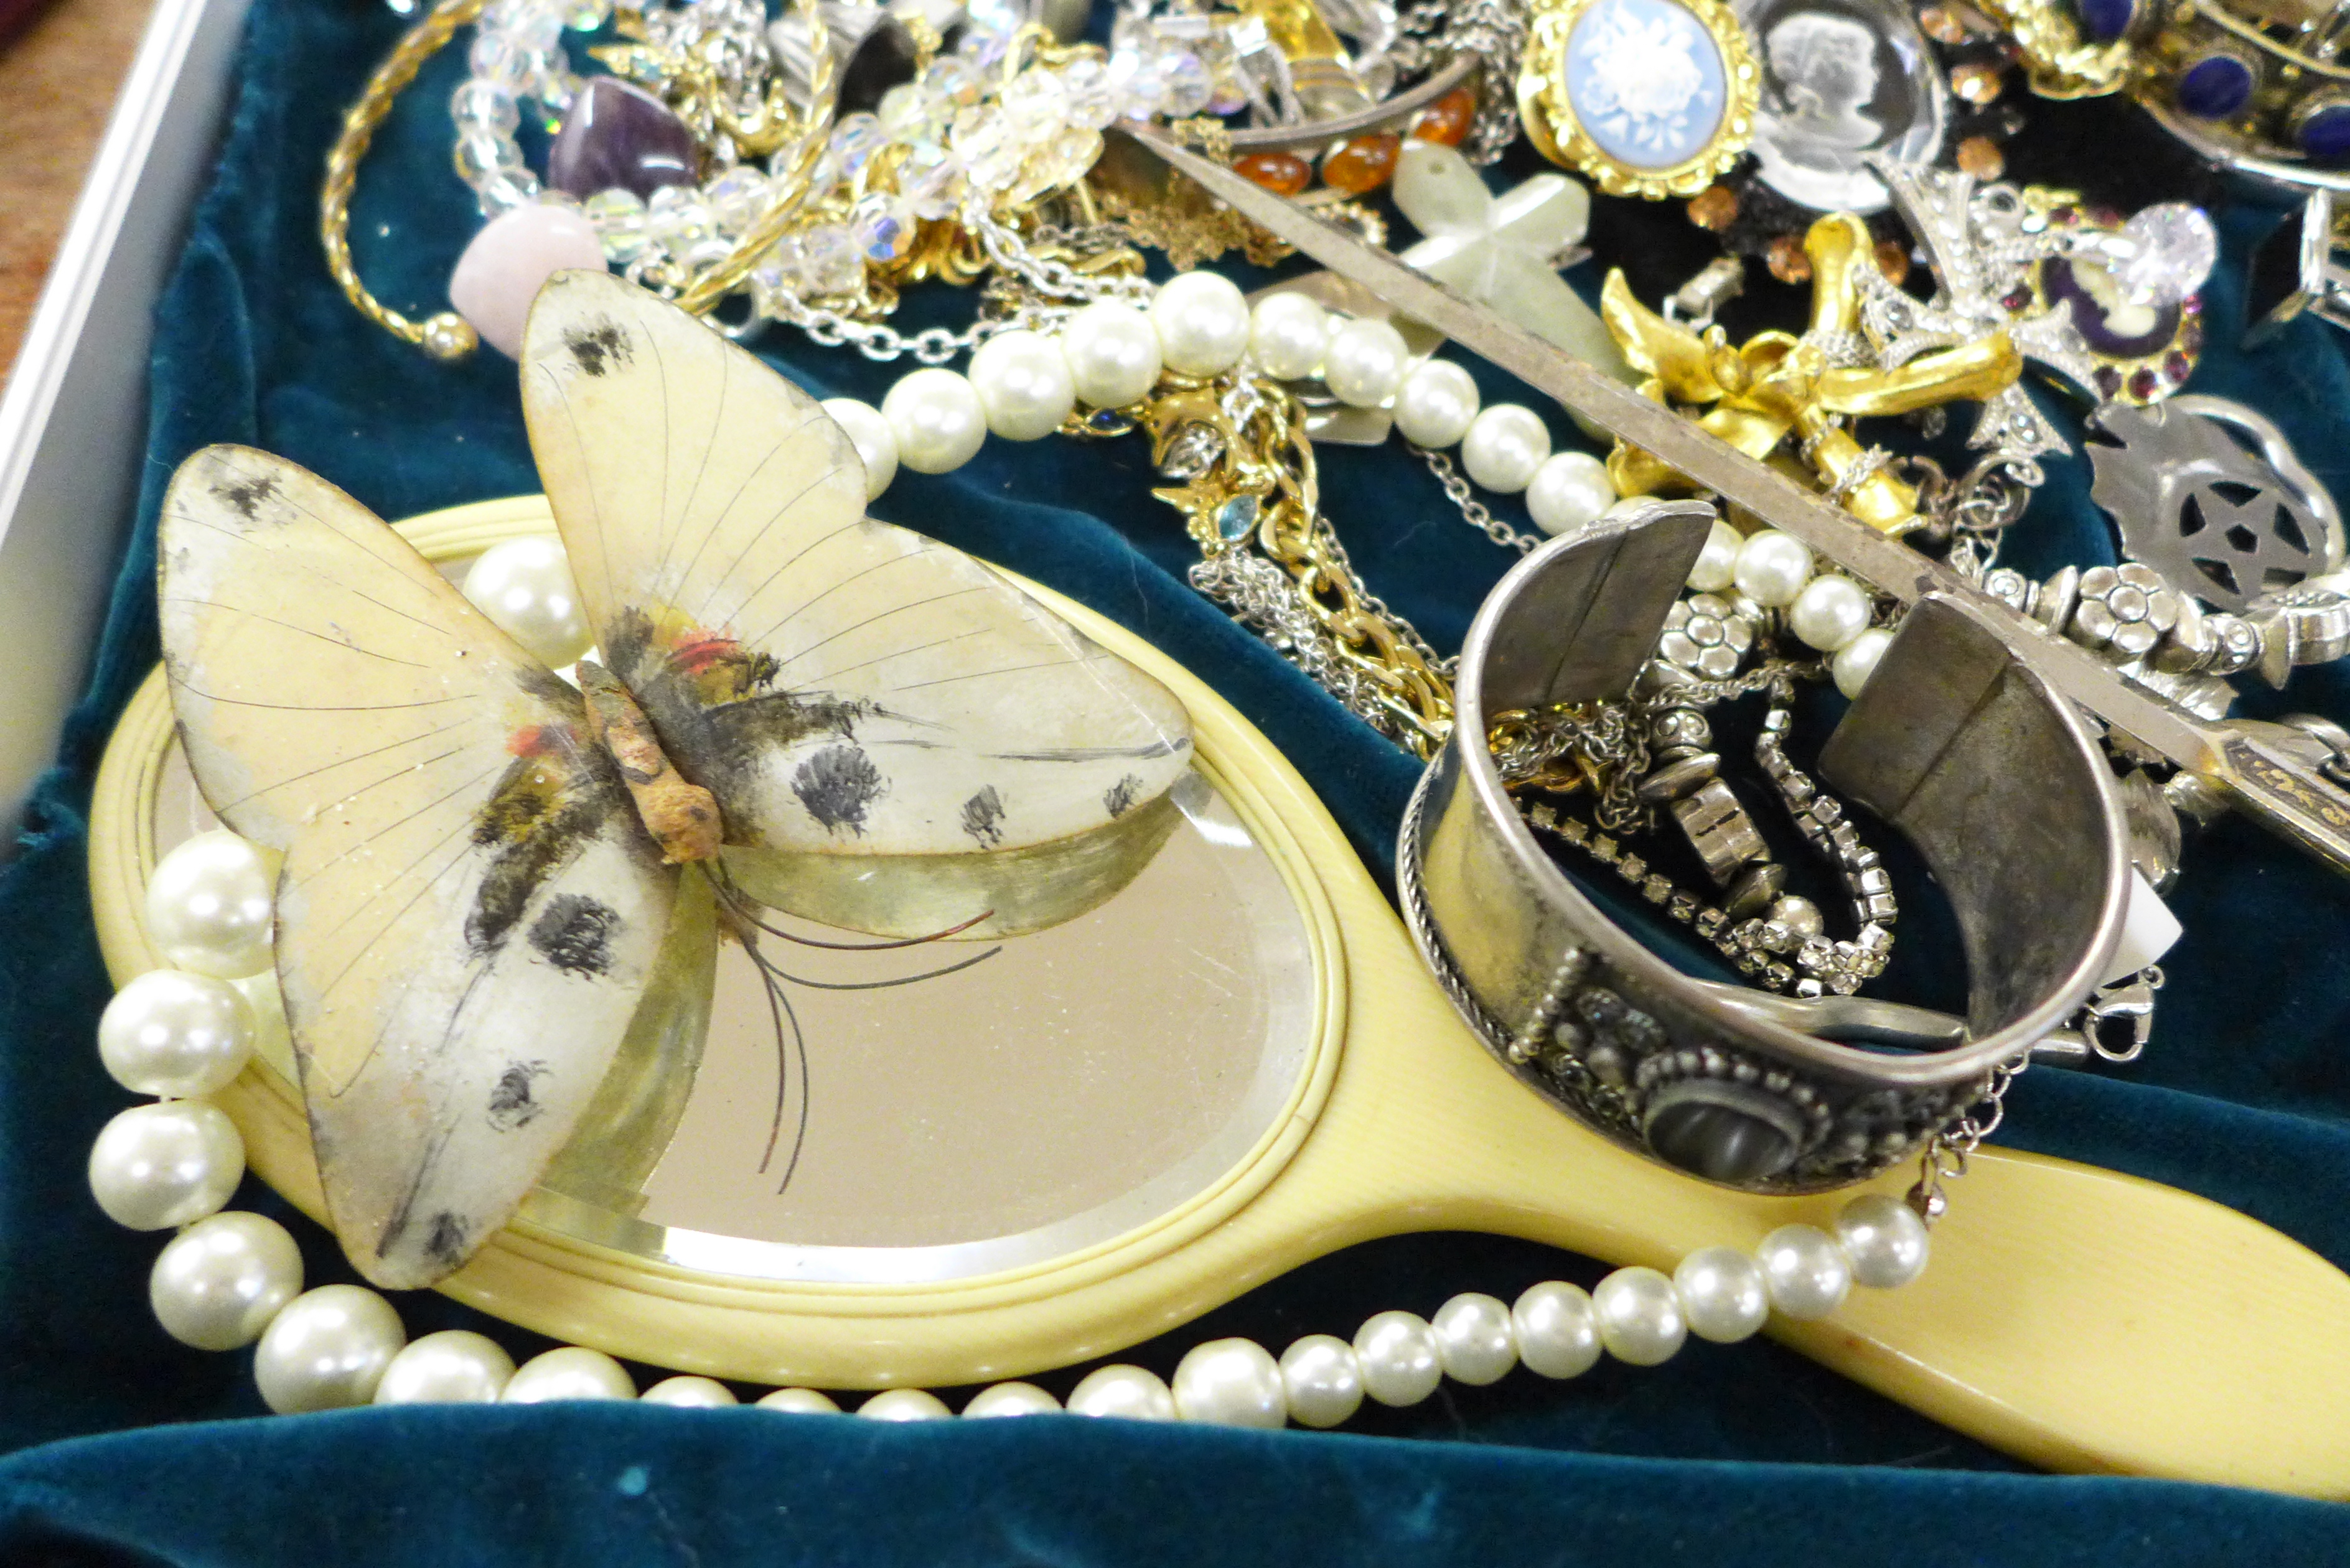 A jewellery case and costume jewellery, hand mirror, etc. - Image 3 of 4